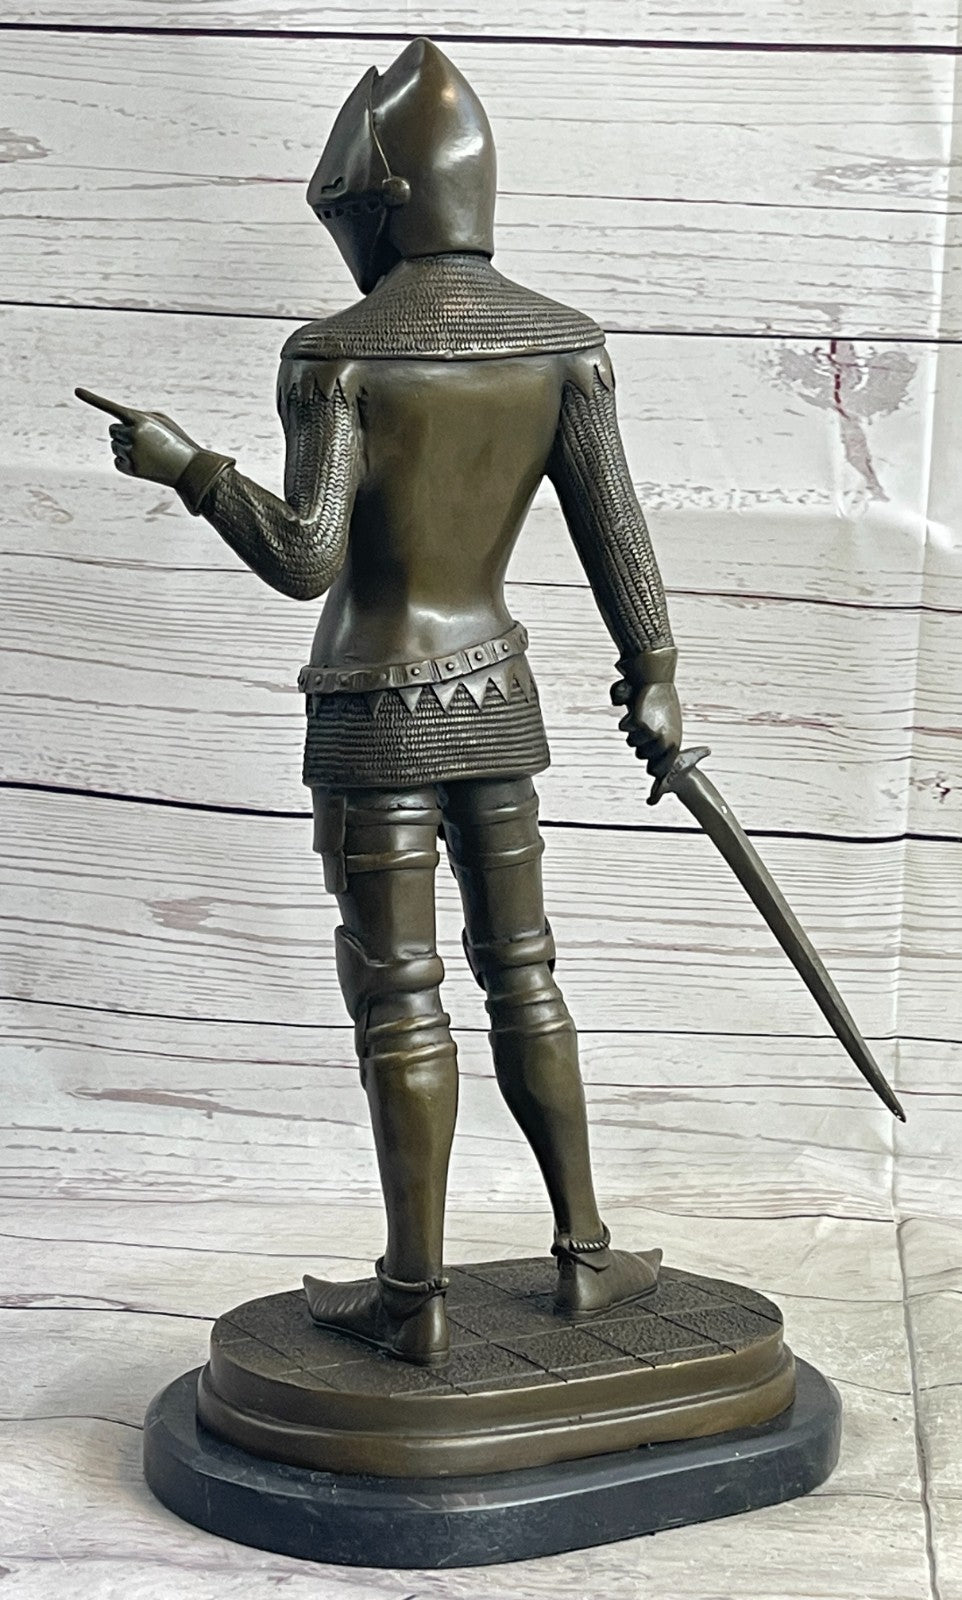 Hot Cast European Knight With Armor and Sword Bronze Sculpture Marble Figurine